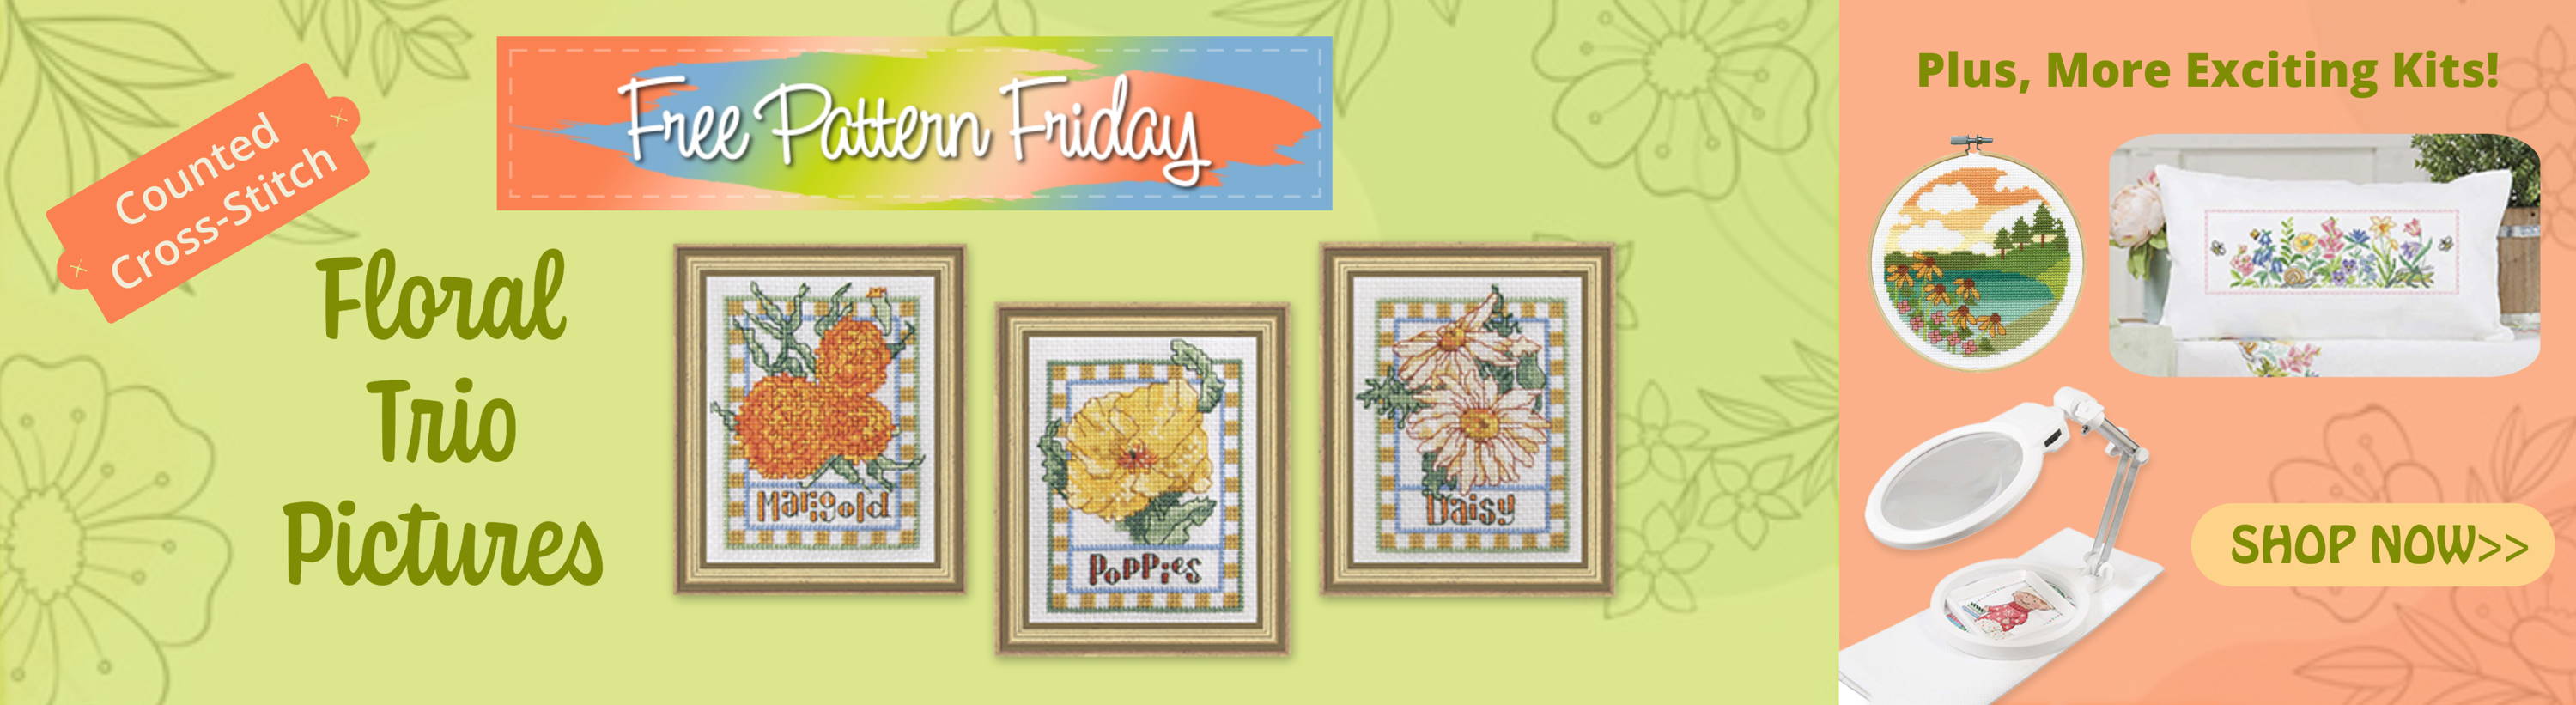 Free Pattern Friday! Floral Trio Pictures (Needlework) Plus more Exciting Kits. 